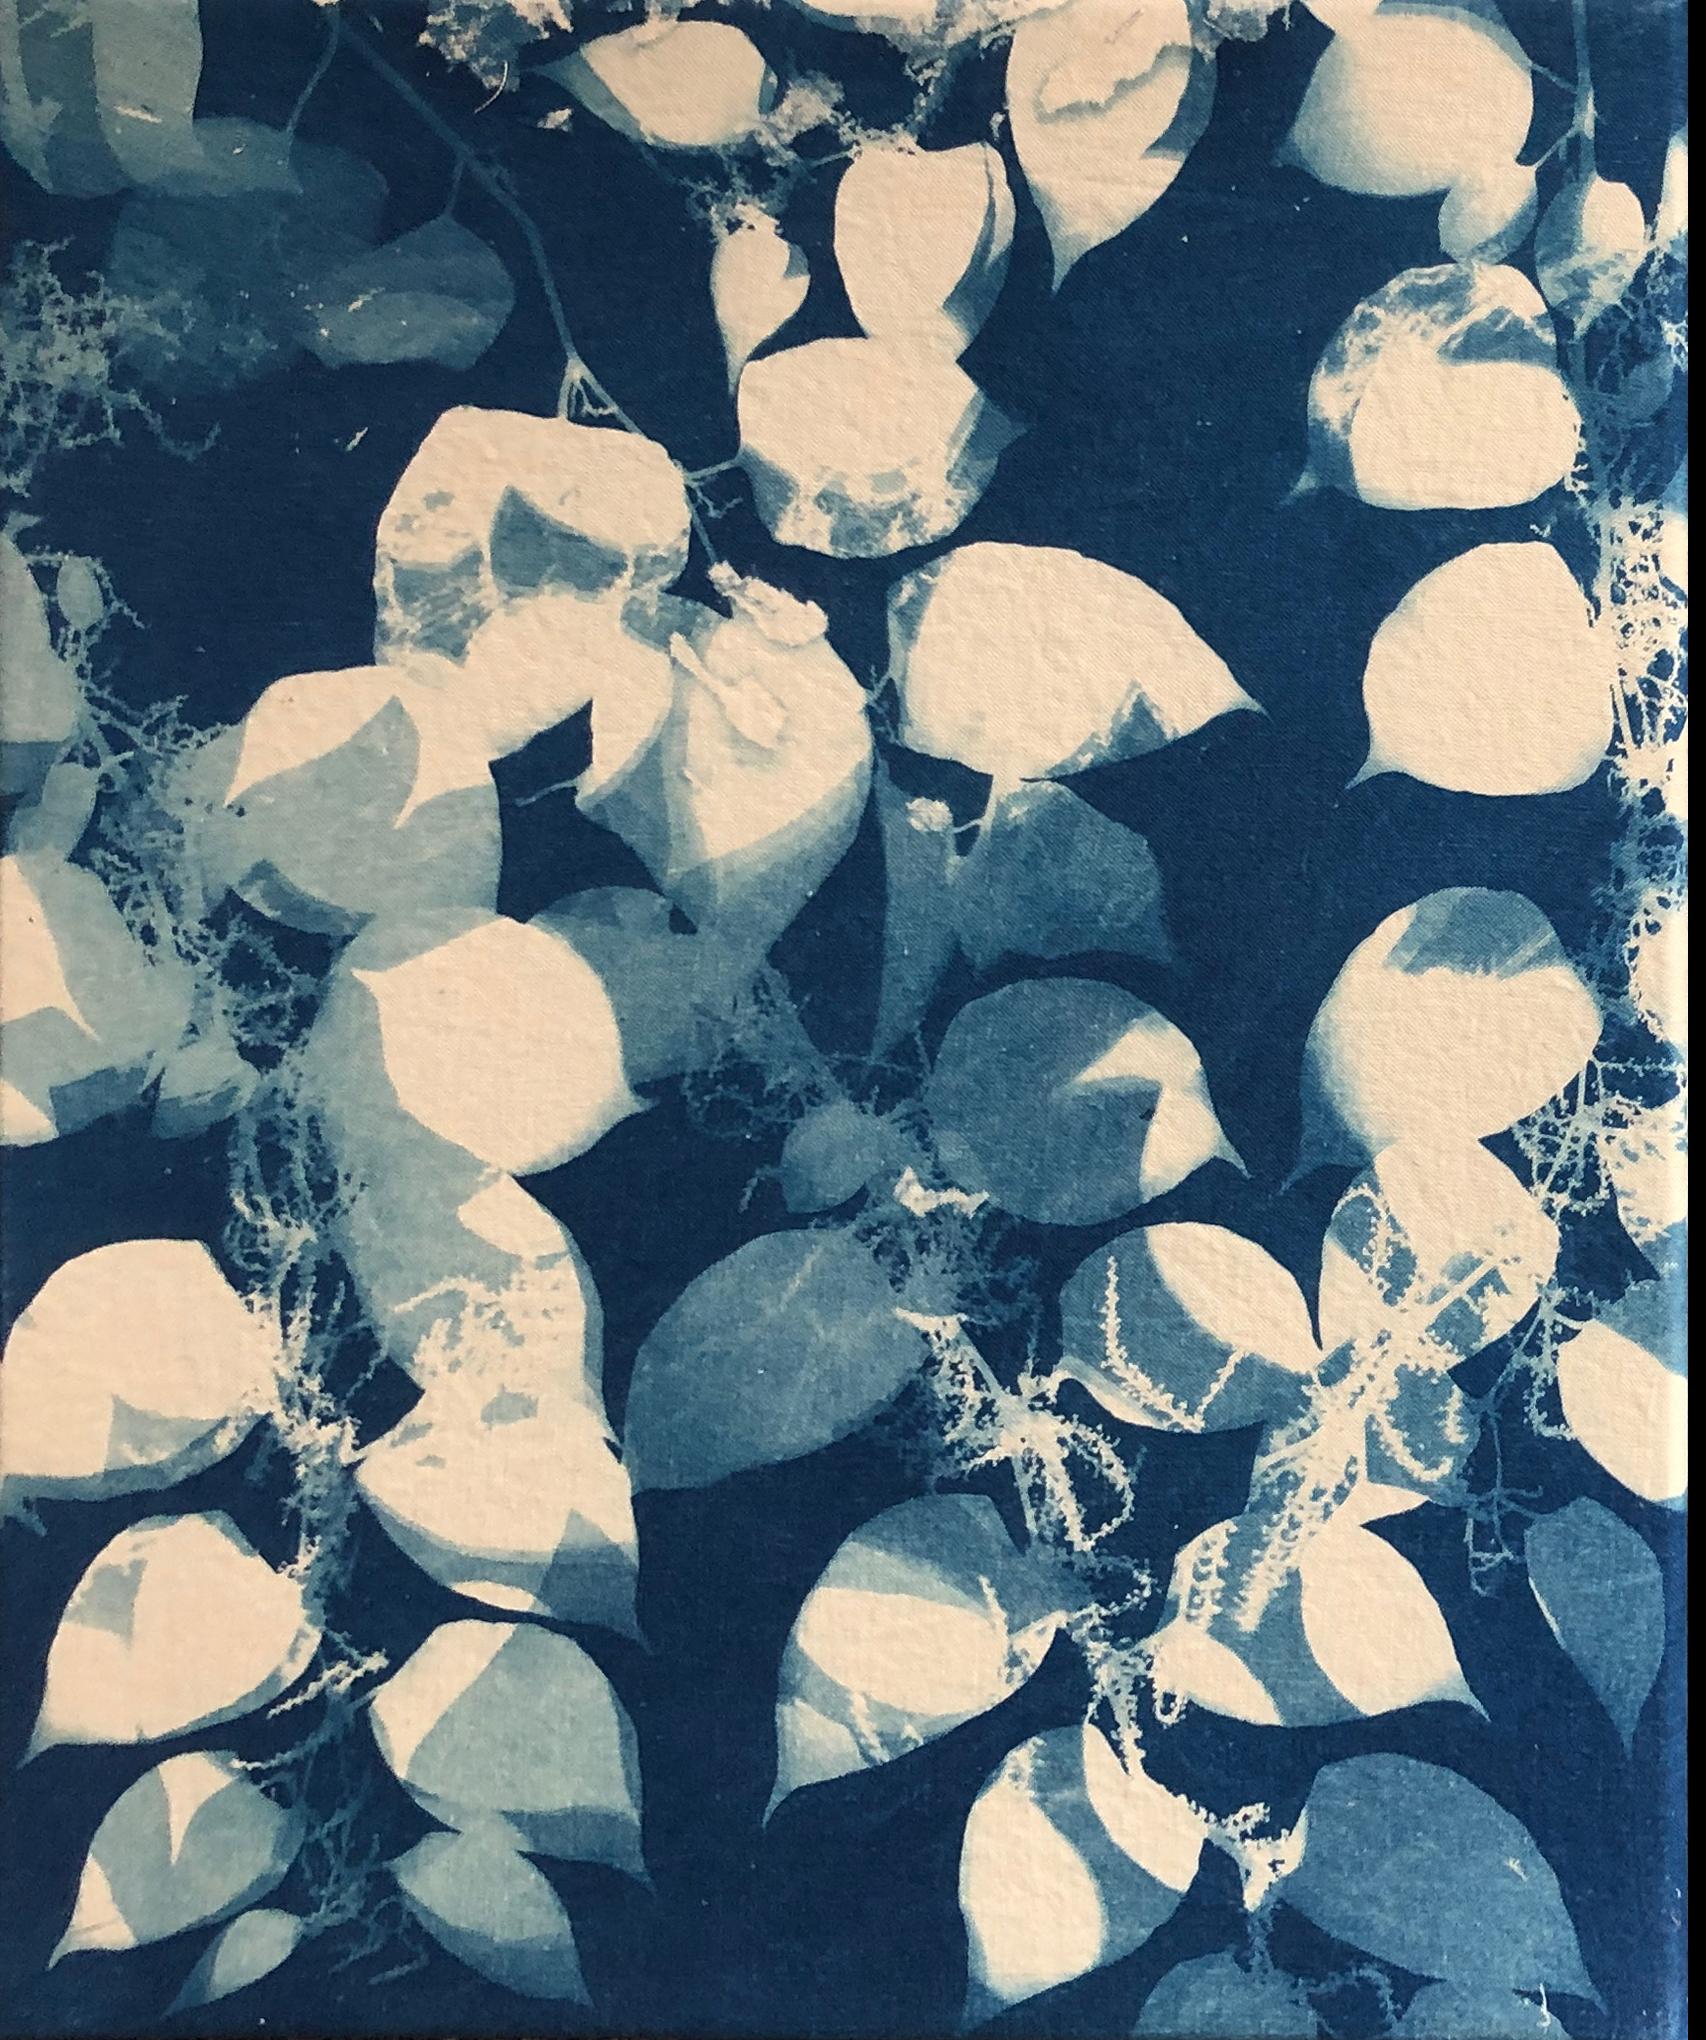 Marie Craig Abstract Photograph - "Knotweed", contemporary, leaves, branches, blue, cyanotype, photograph